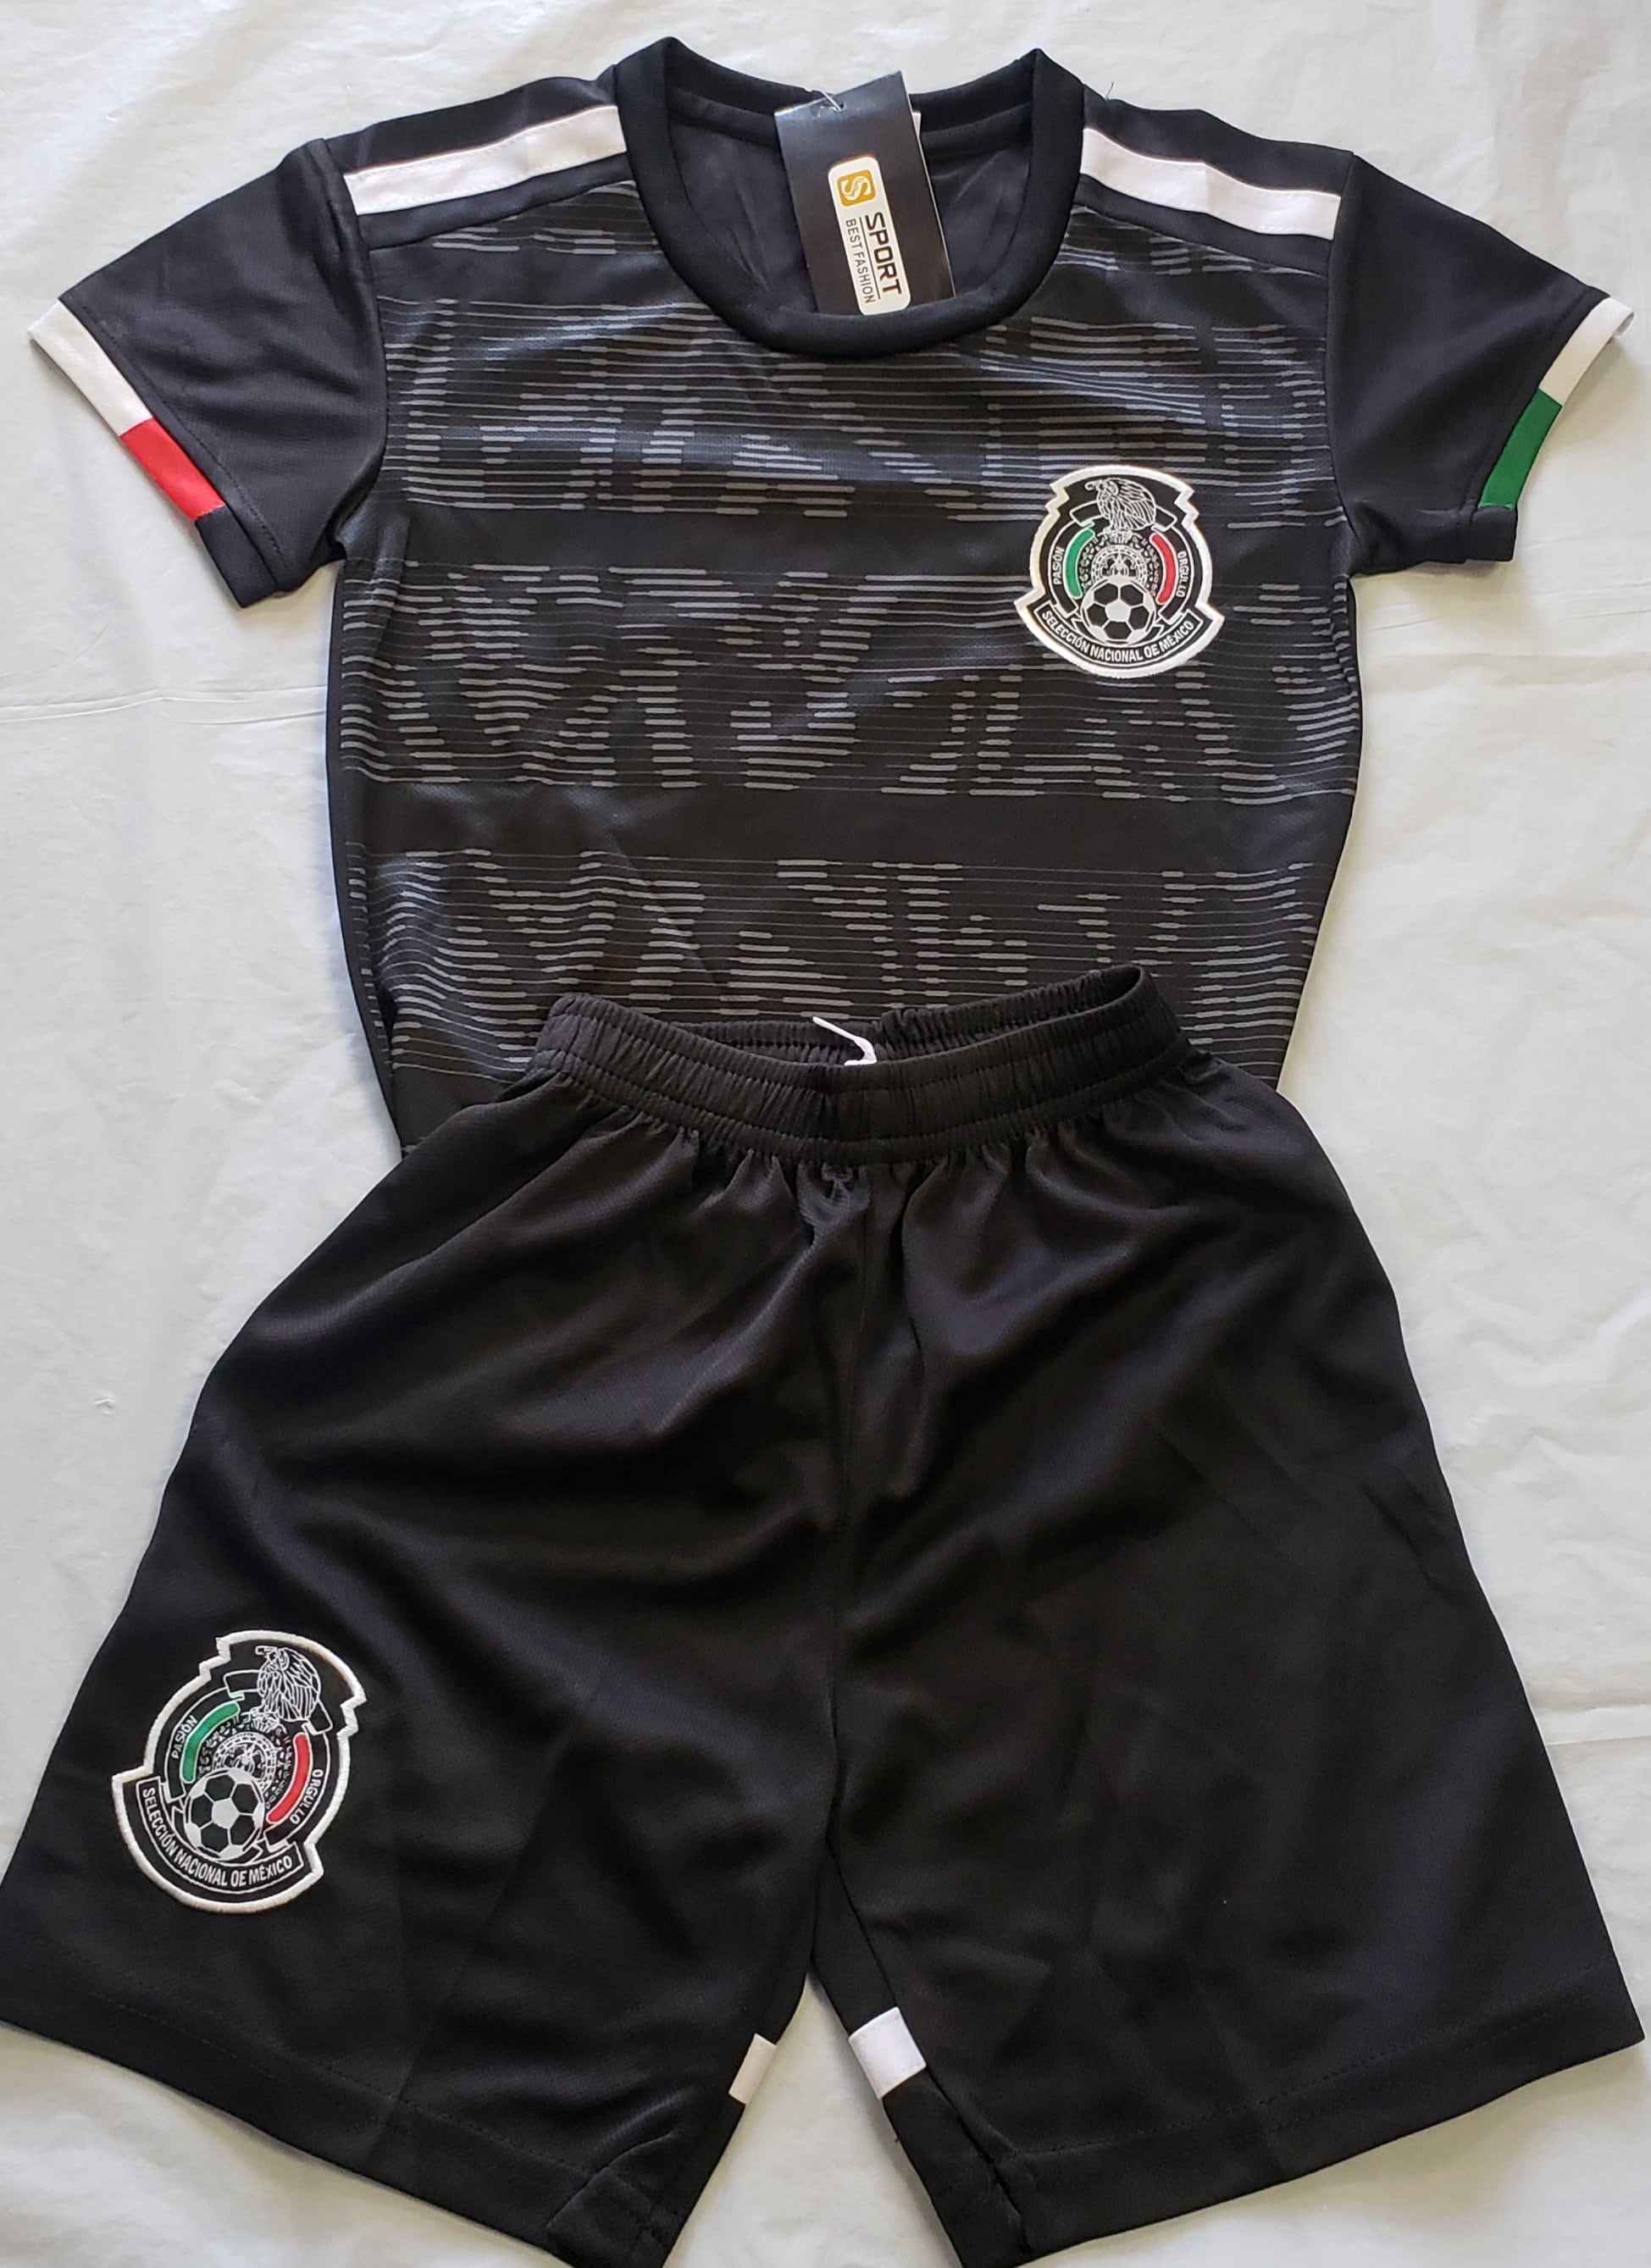 the new mexico jersey